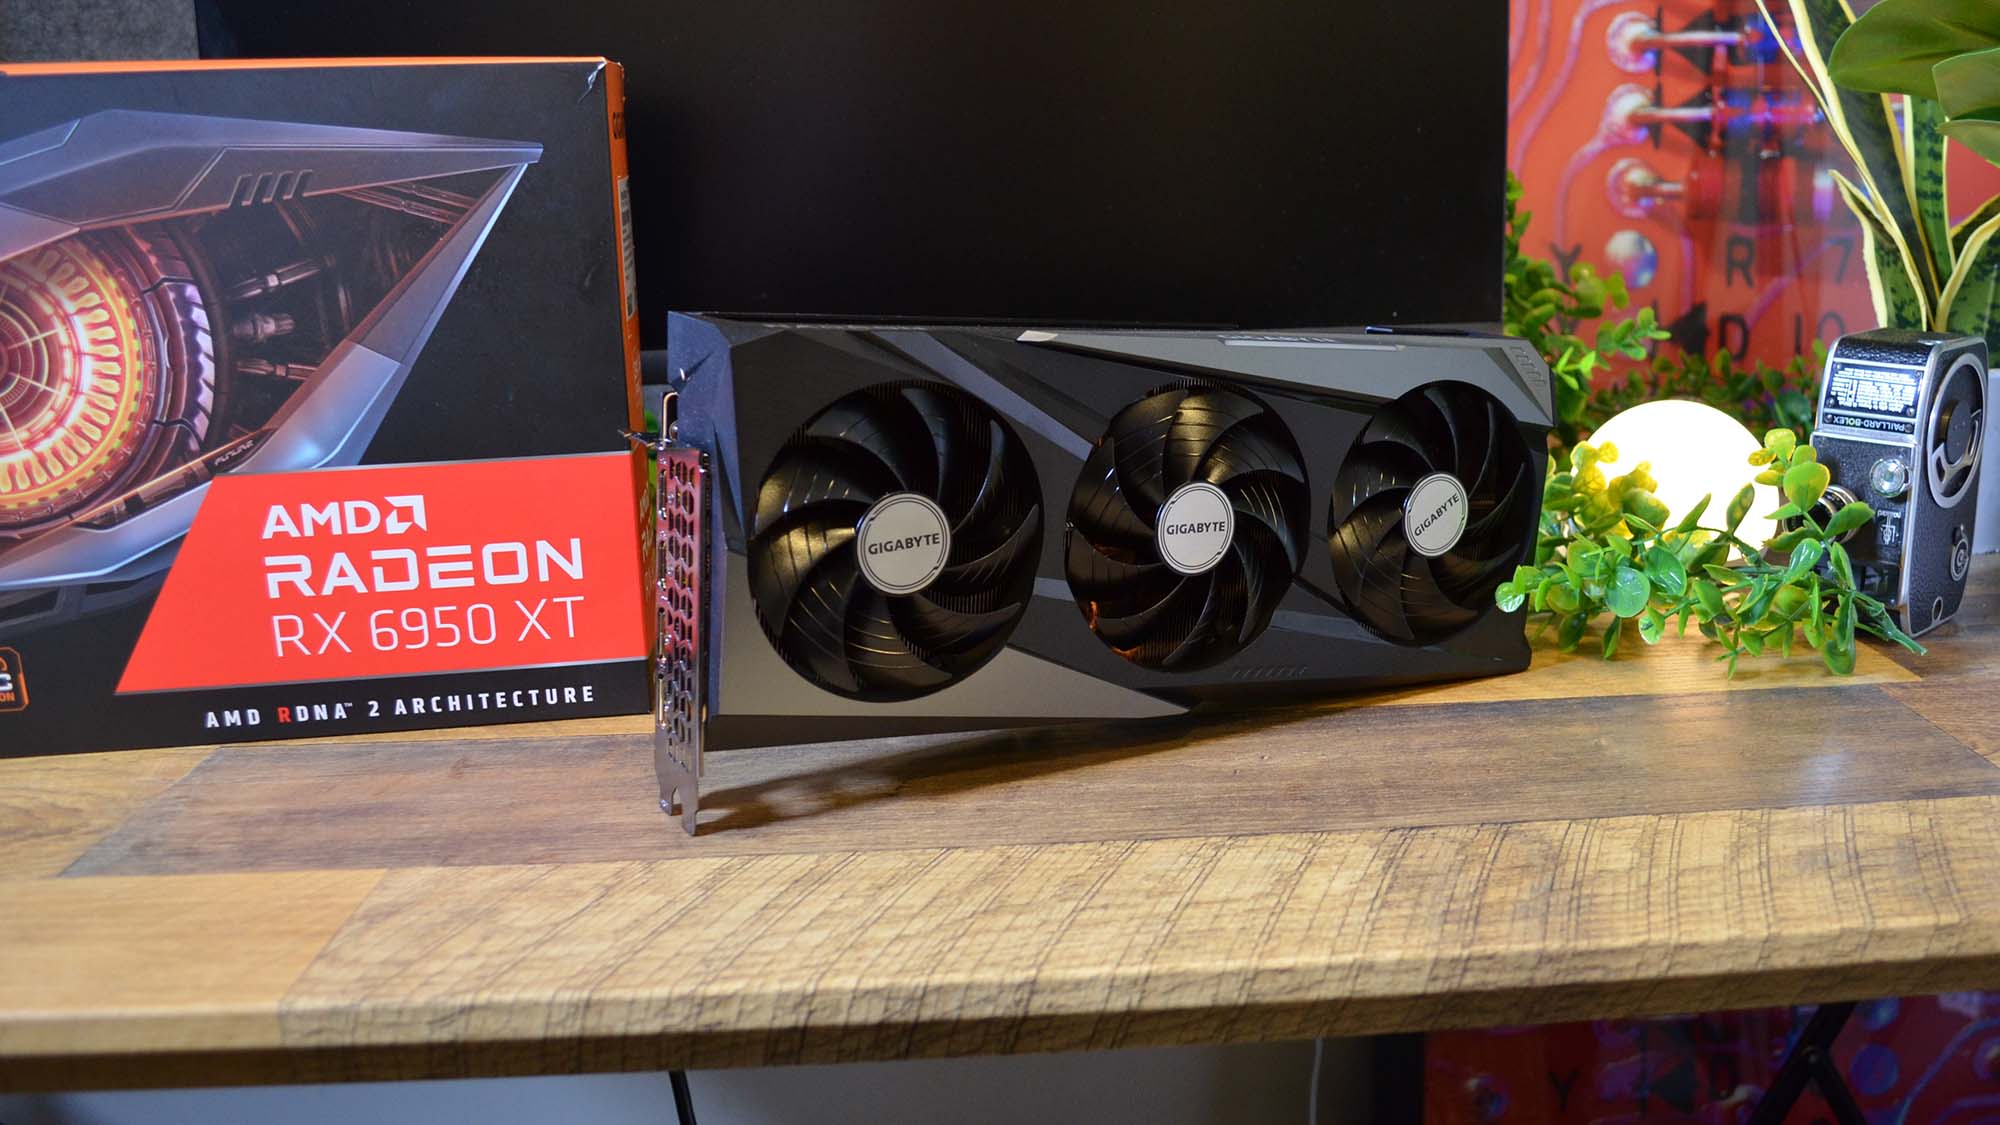 Is the Radeon RX 6950 XT worth buying in this Holiday Season?